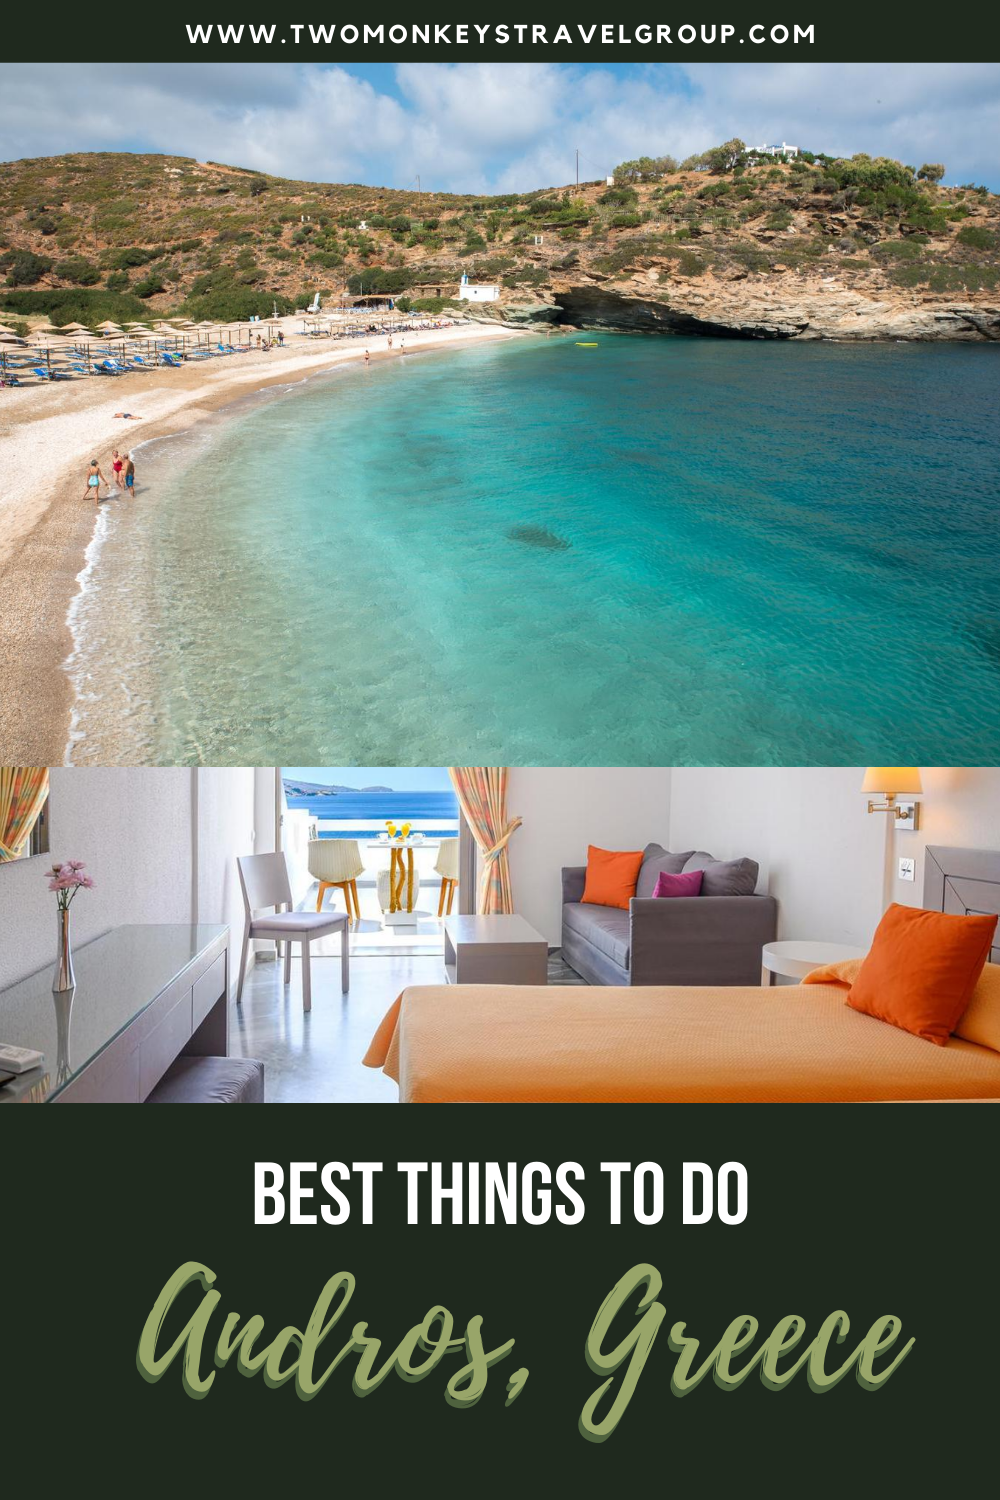 10 Best Things to do in Andros, Greece [with Suggested Tours]